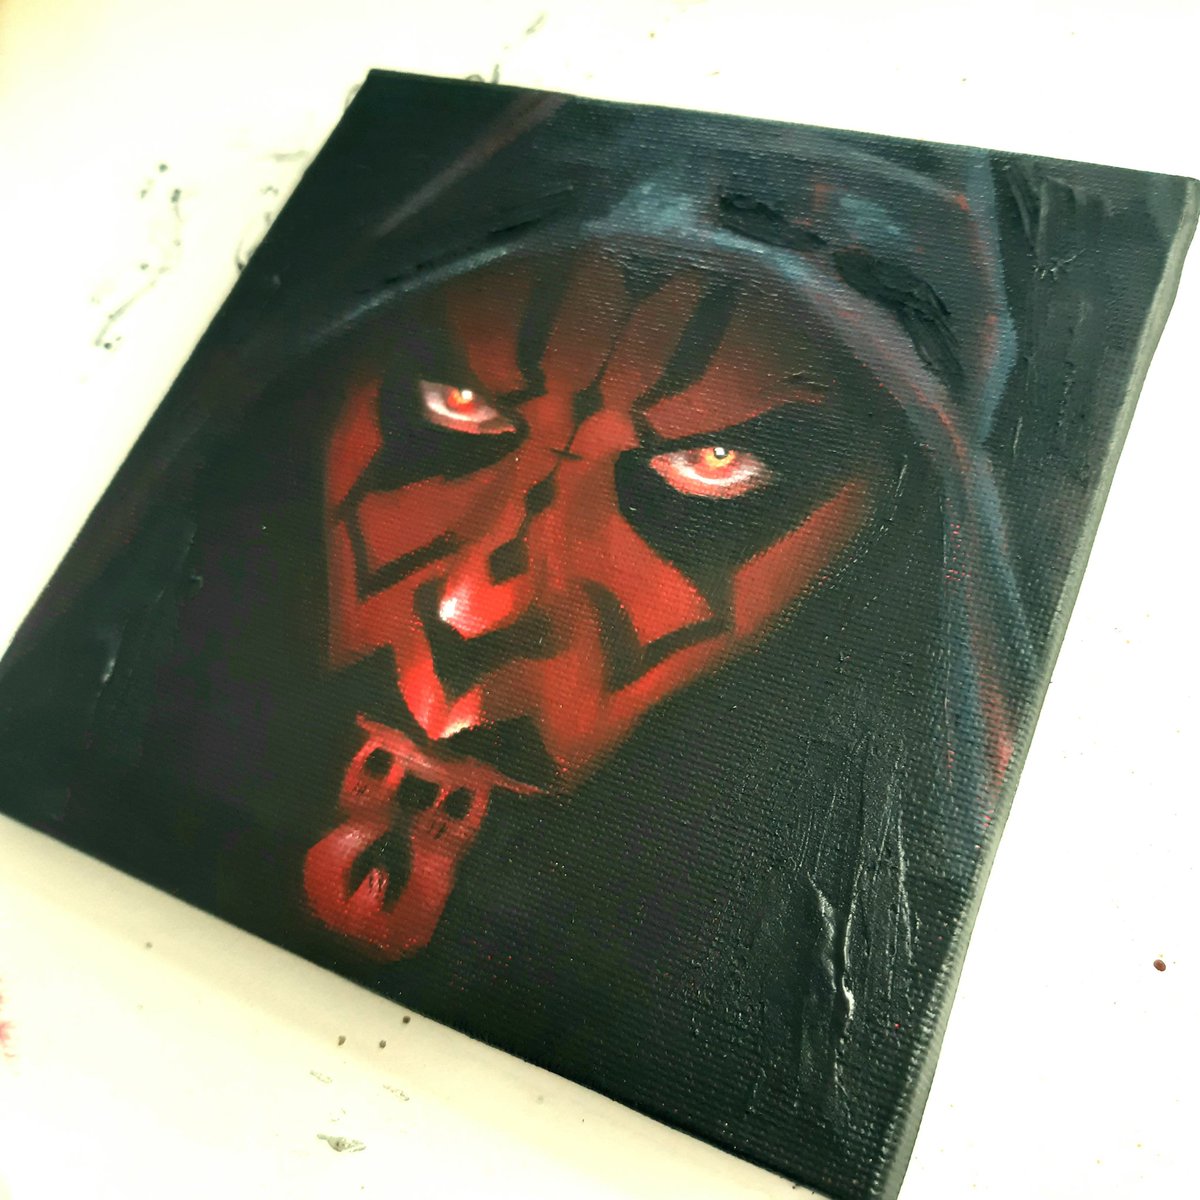 Day 4 #Maythe4thBeWithYou Darth Maul 90s Movie Collection 🎬 6x6' acrylic on canvas Subtly textured